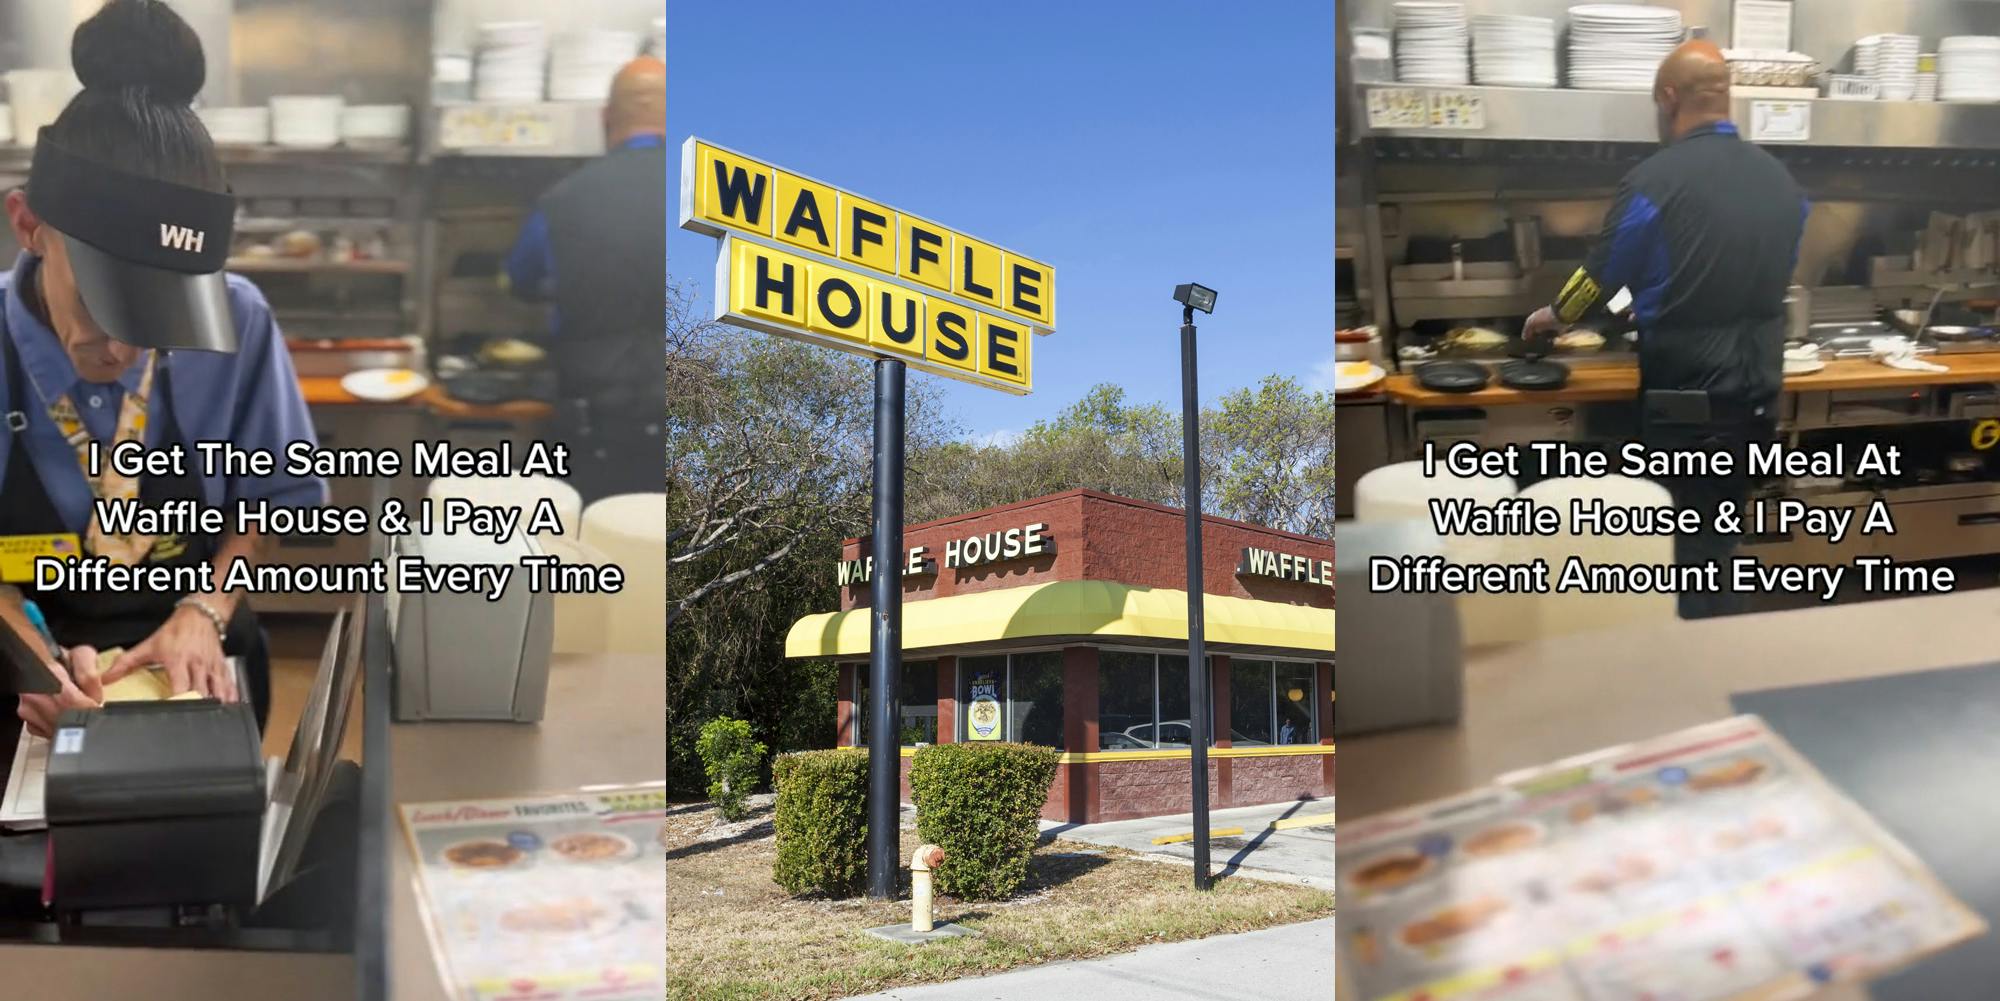 Waffle House worker at counter with caption "I Get The Same Meal At Waffle House & I Pay A Different Amount Every Time" (l) Waffle House sign in front of Waffle House building (c) Waffle House worker at counter with caption "I Get The Same Meal At Waffle House & I Pay A Different Amount Every Time" (r)